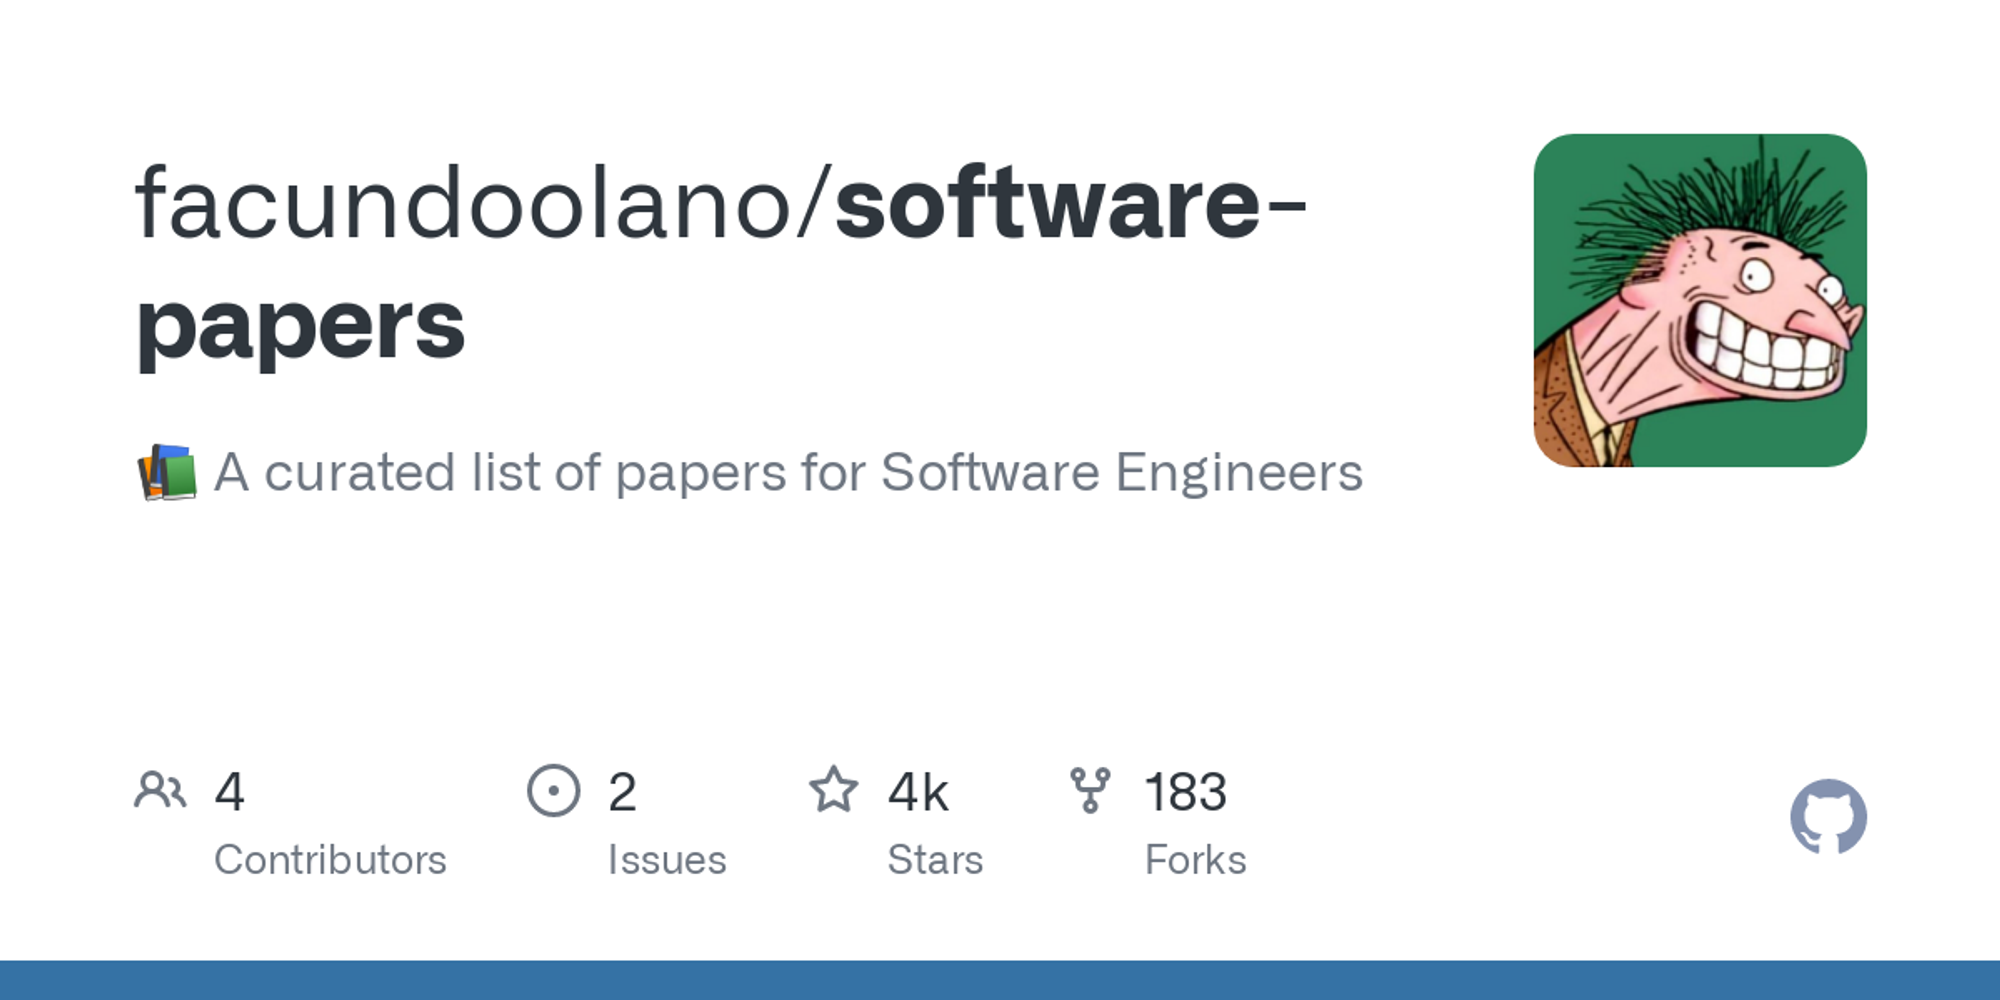 GitHub - facundoolano/software-papers: 📚 A curated list of papers for Software Engineers